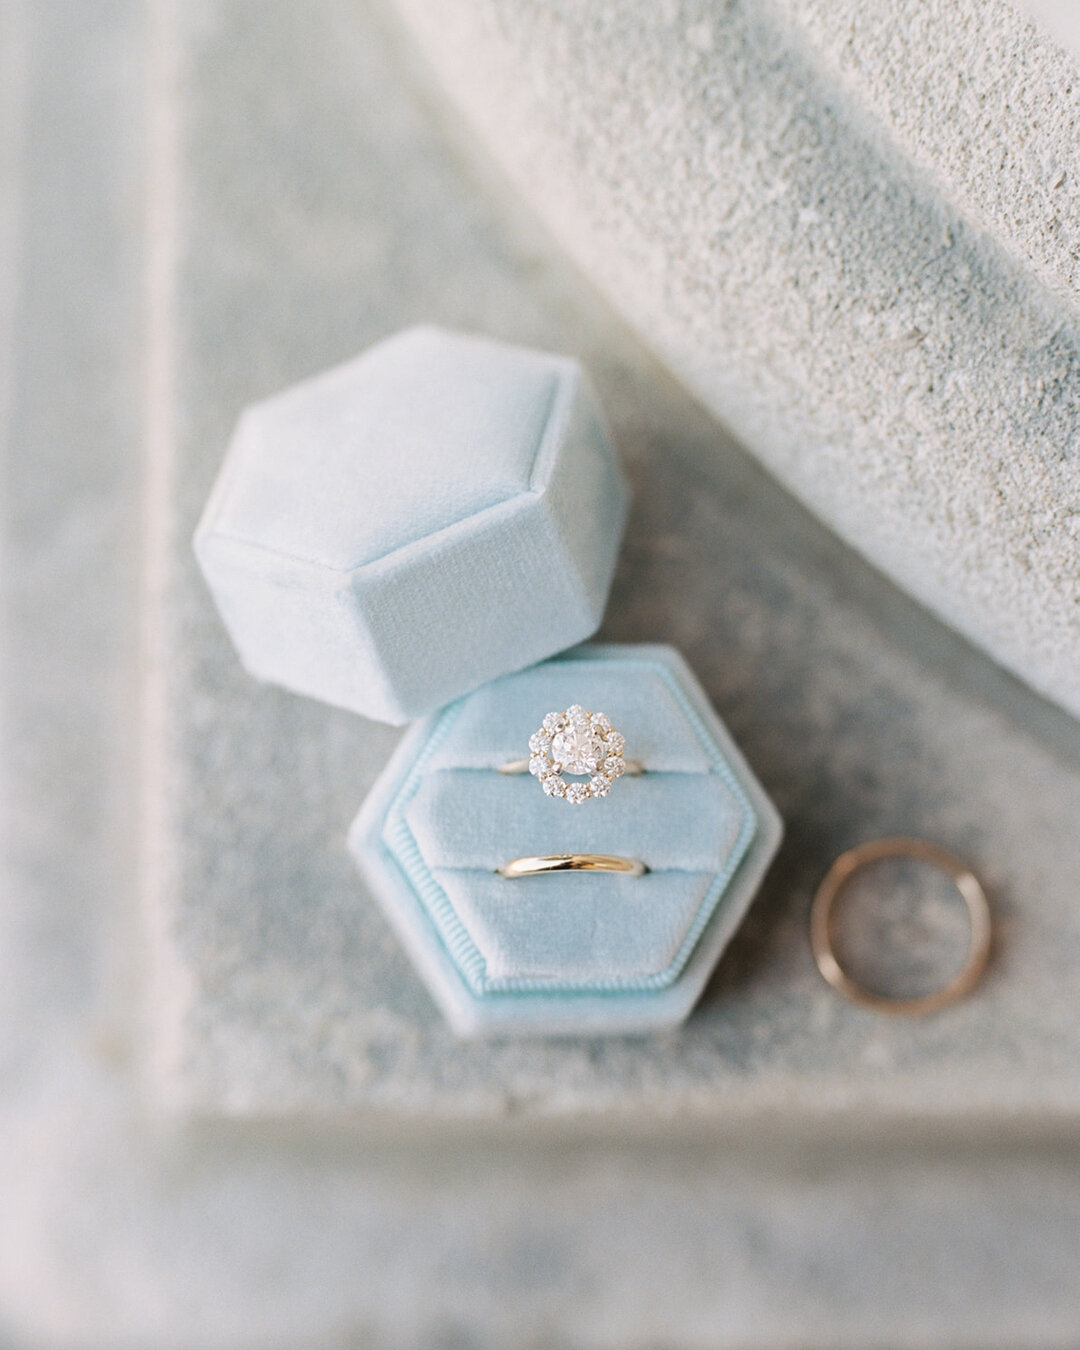 Wedding photographers - what beautiful pieces do you love to add to your detail shots?  This beautiful blue velvet ring box in this shot by @meghangrayphoto is stunning!